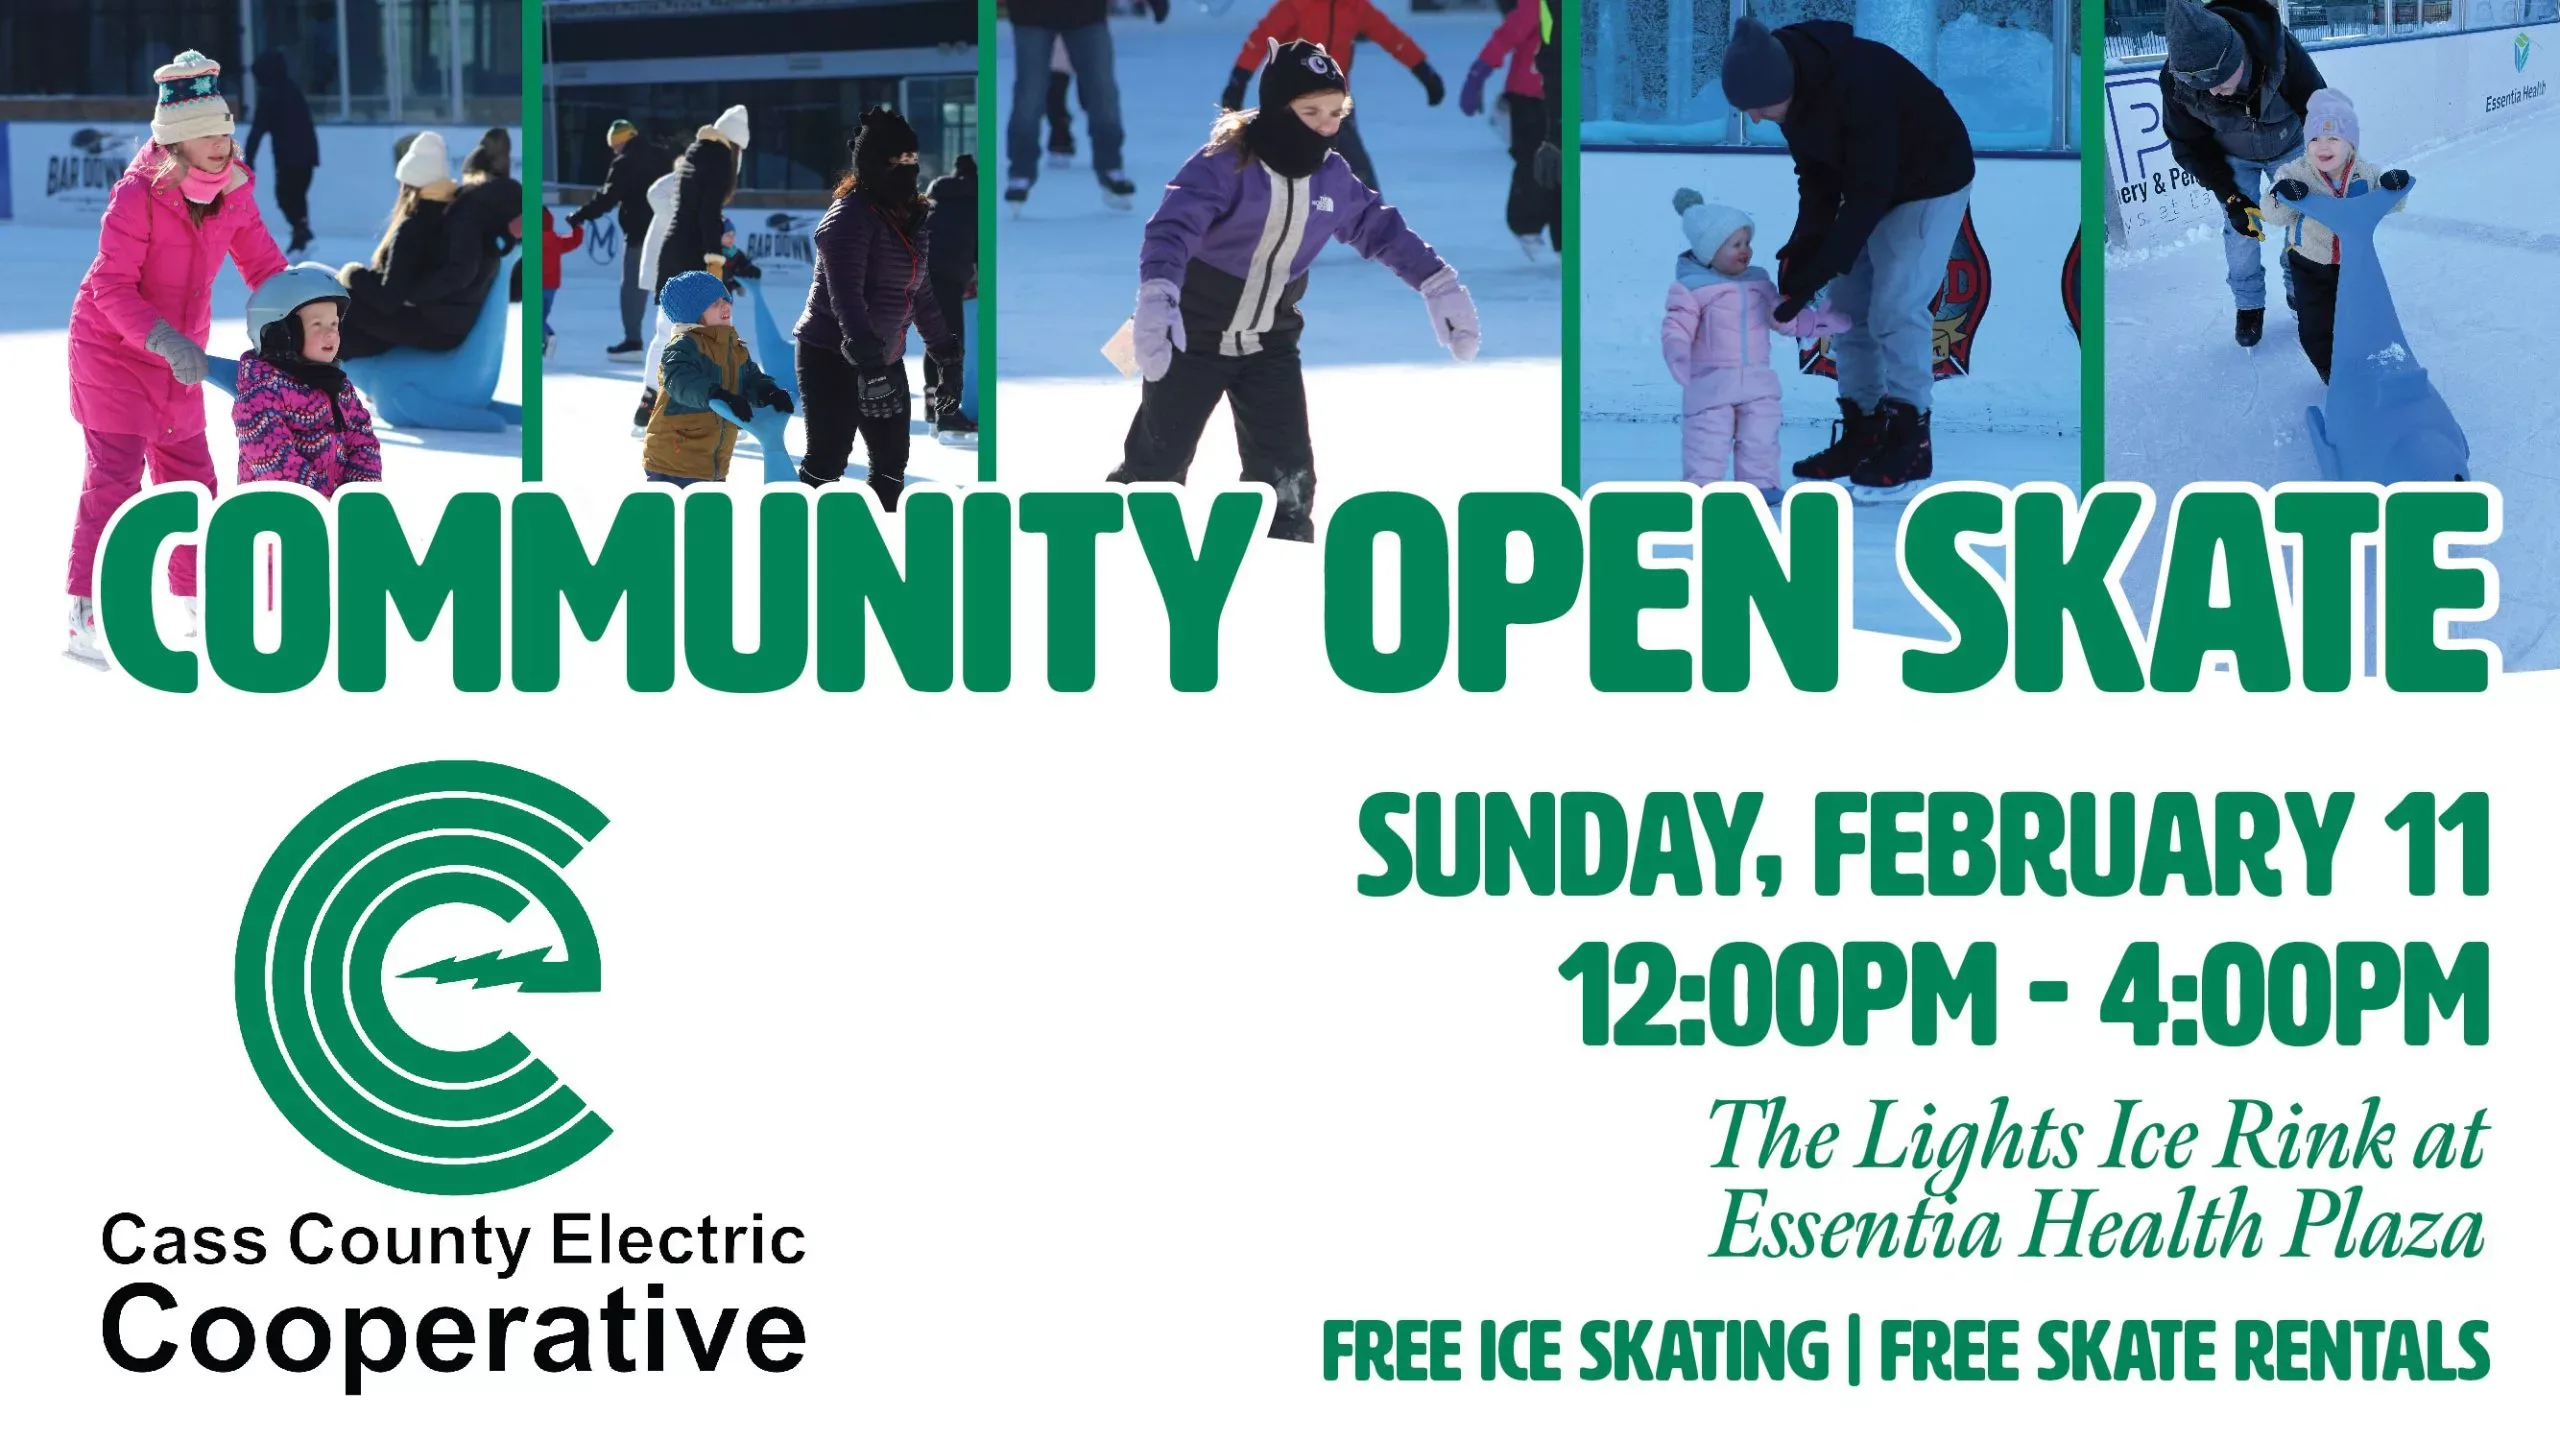 Cass County Electric Cooperative Community Open Skate